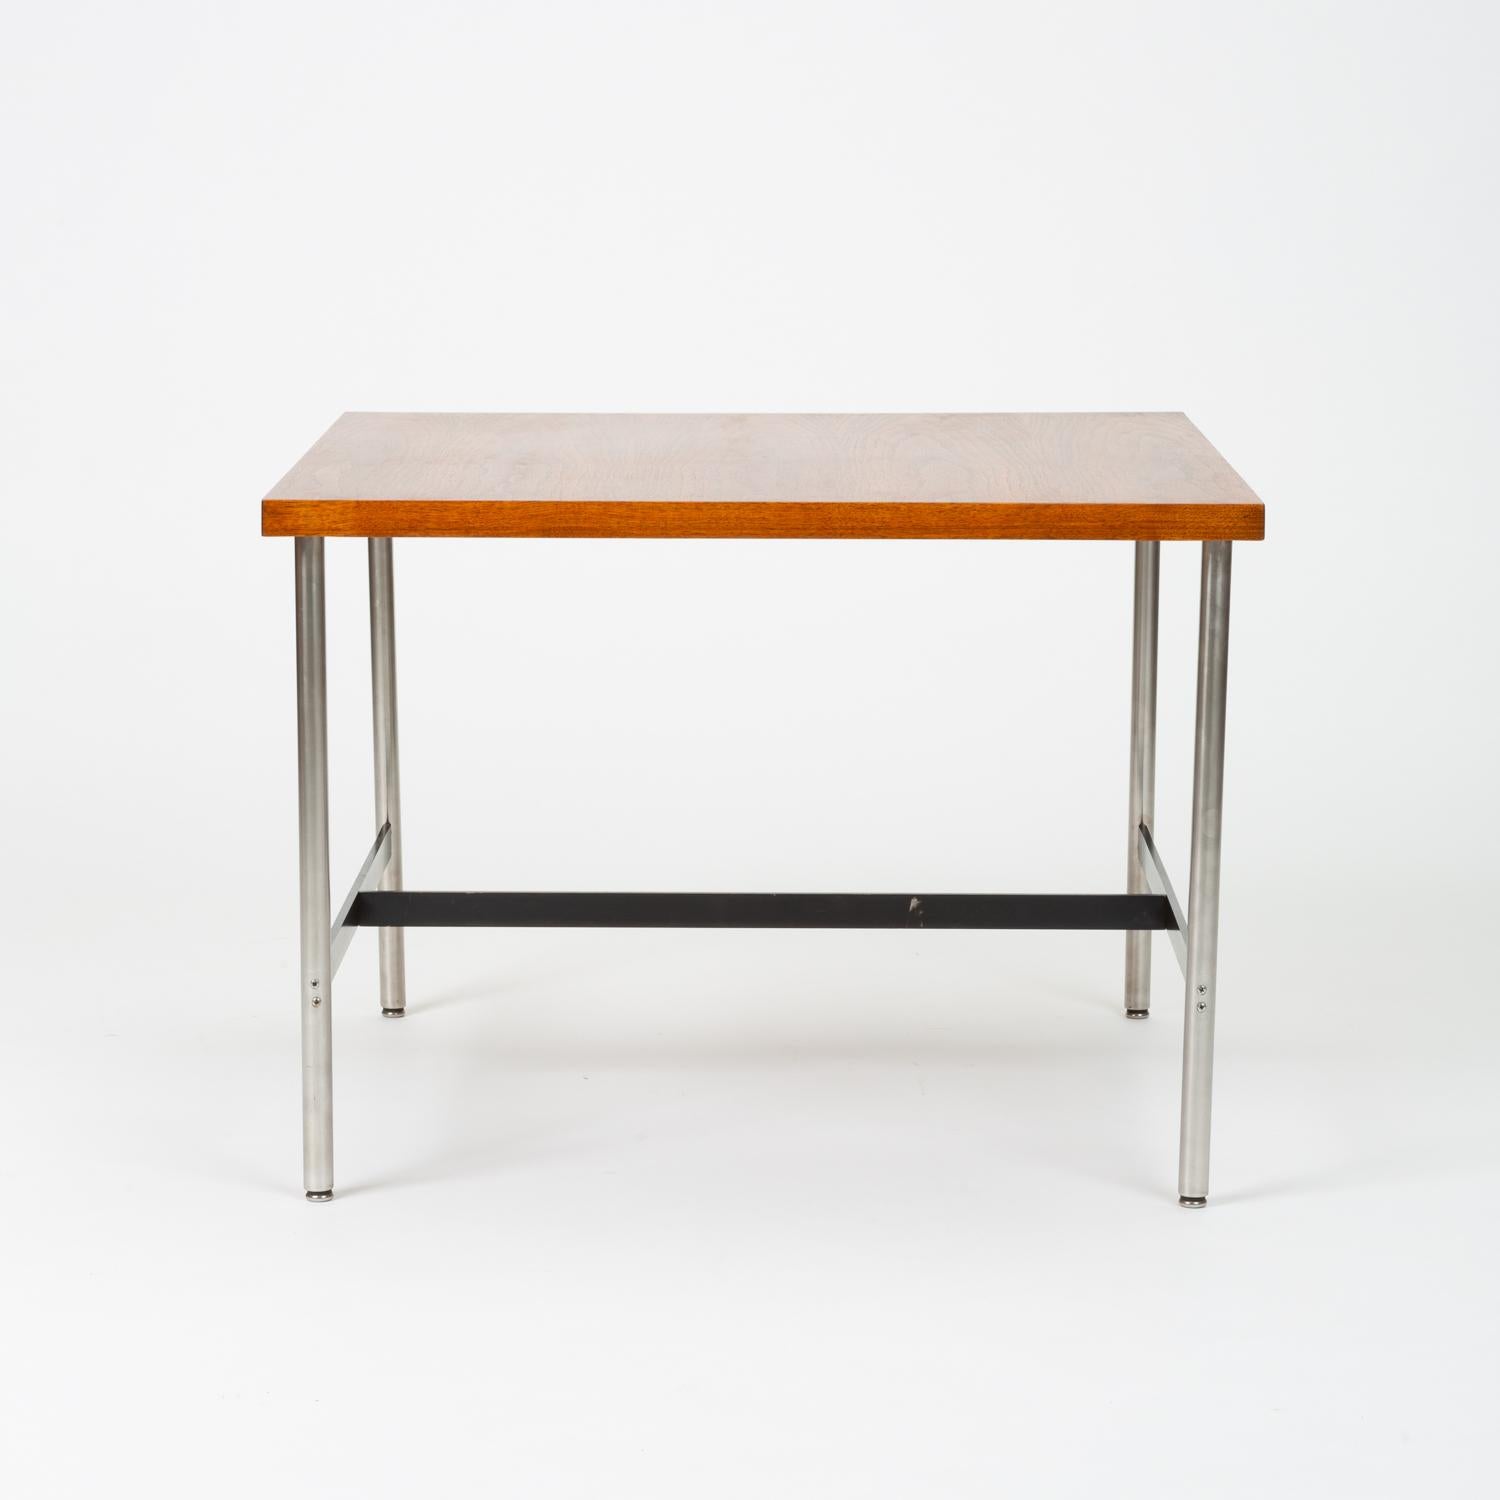 A modernist children’s table by Herman Miller with a square tabletop and metal frame. Four round legs of brushed steel with steel glides sit slightly inset from the corners of the work surface. An I-shaped metal support in black-enameled steel joins